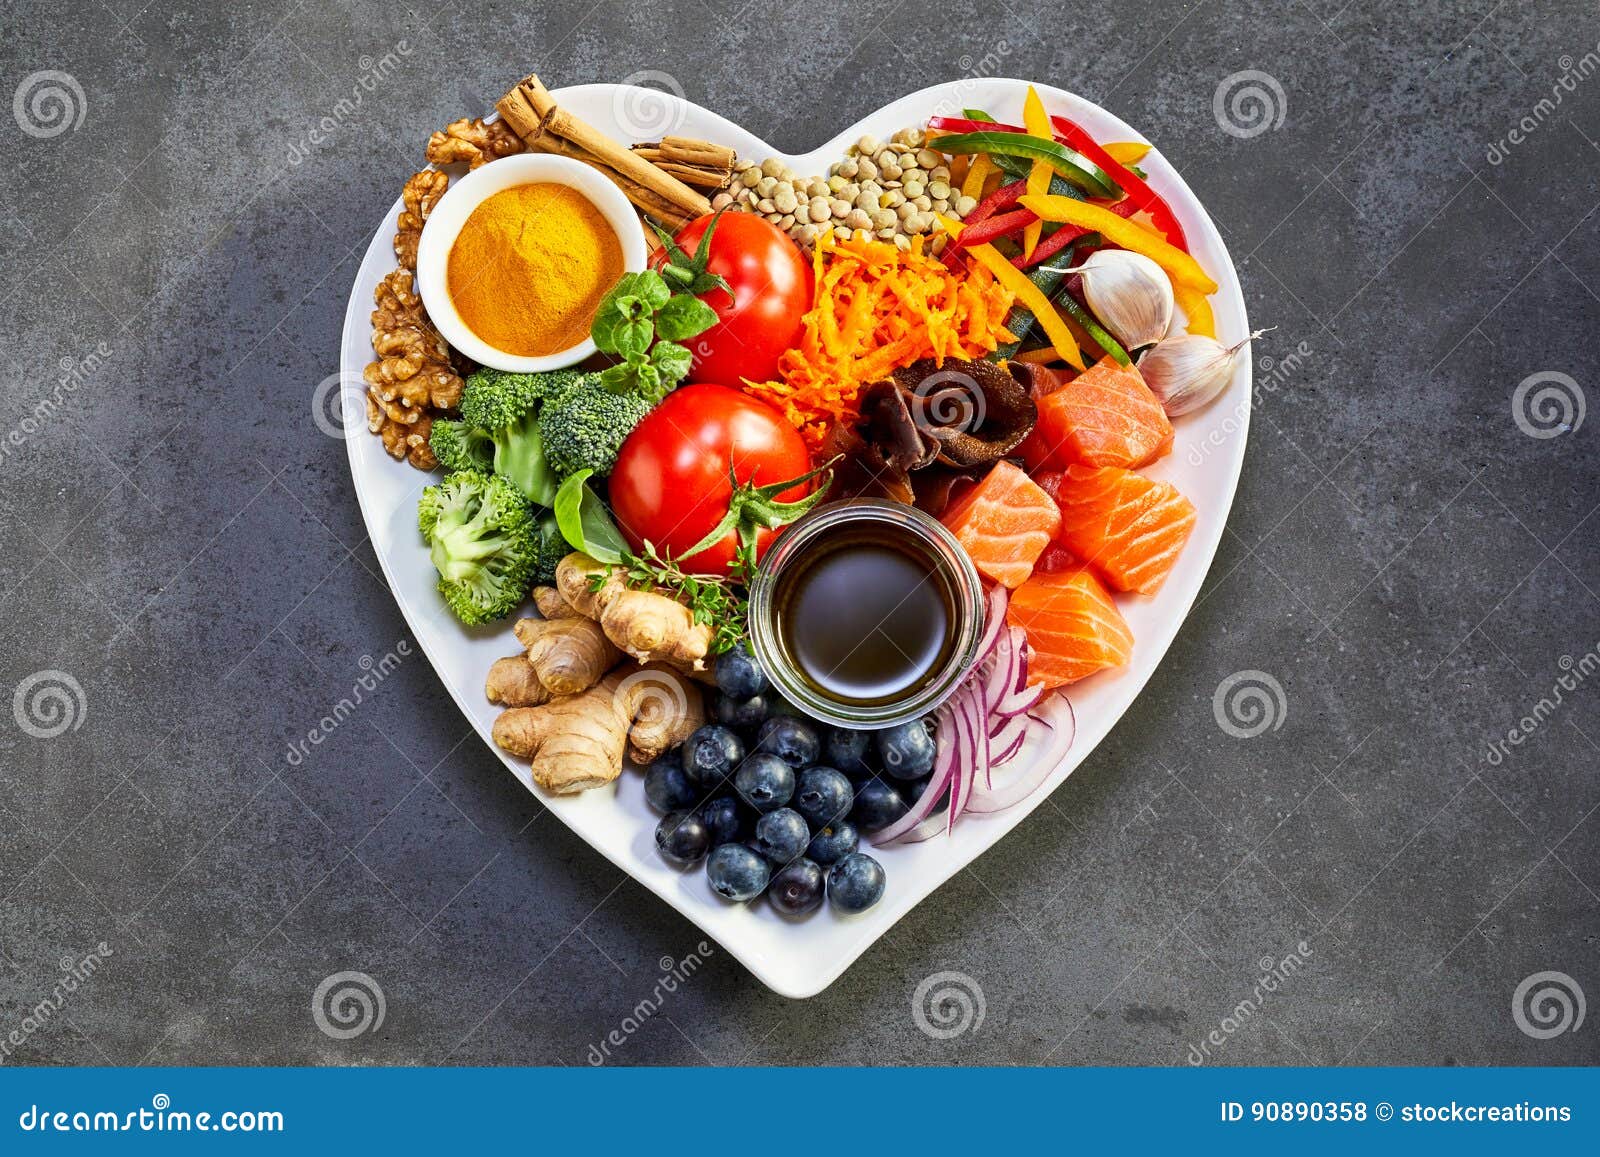 healthy diet for heart and cardiovascular system